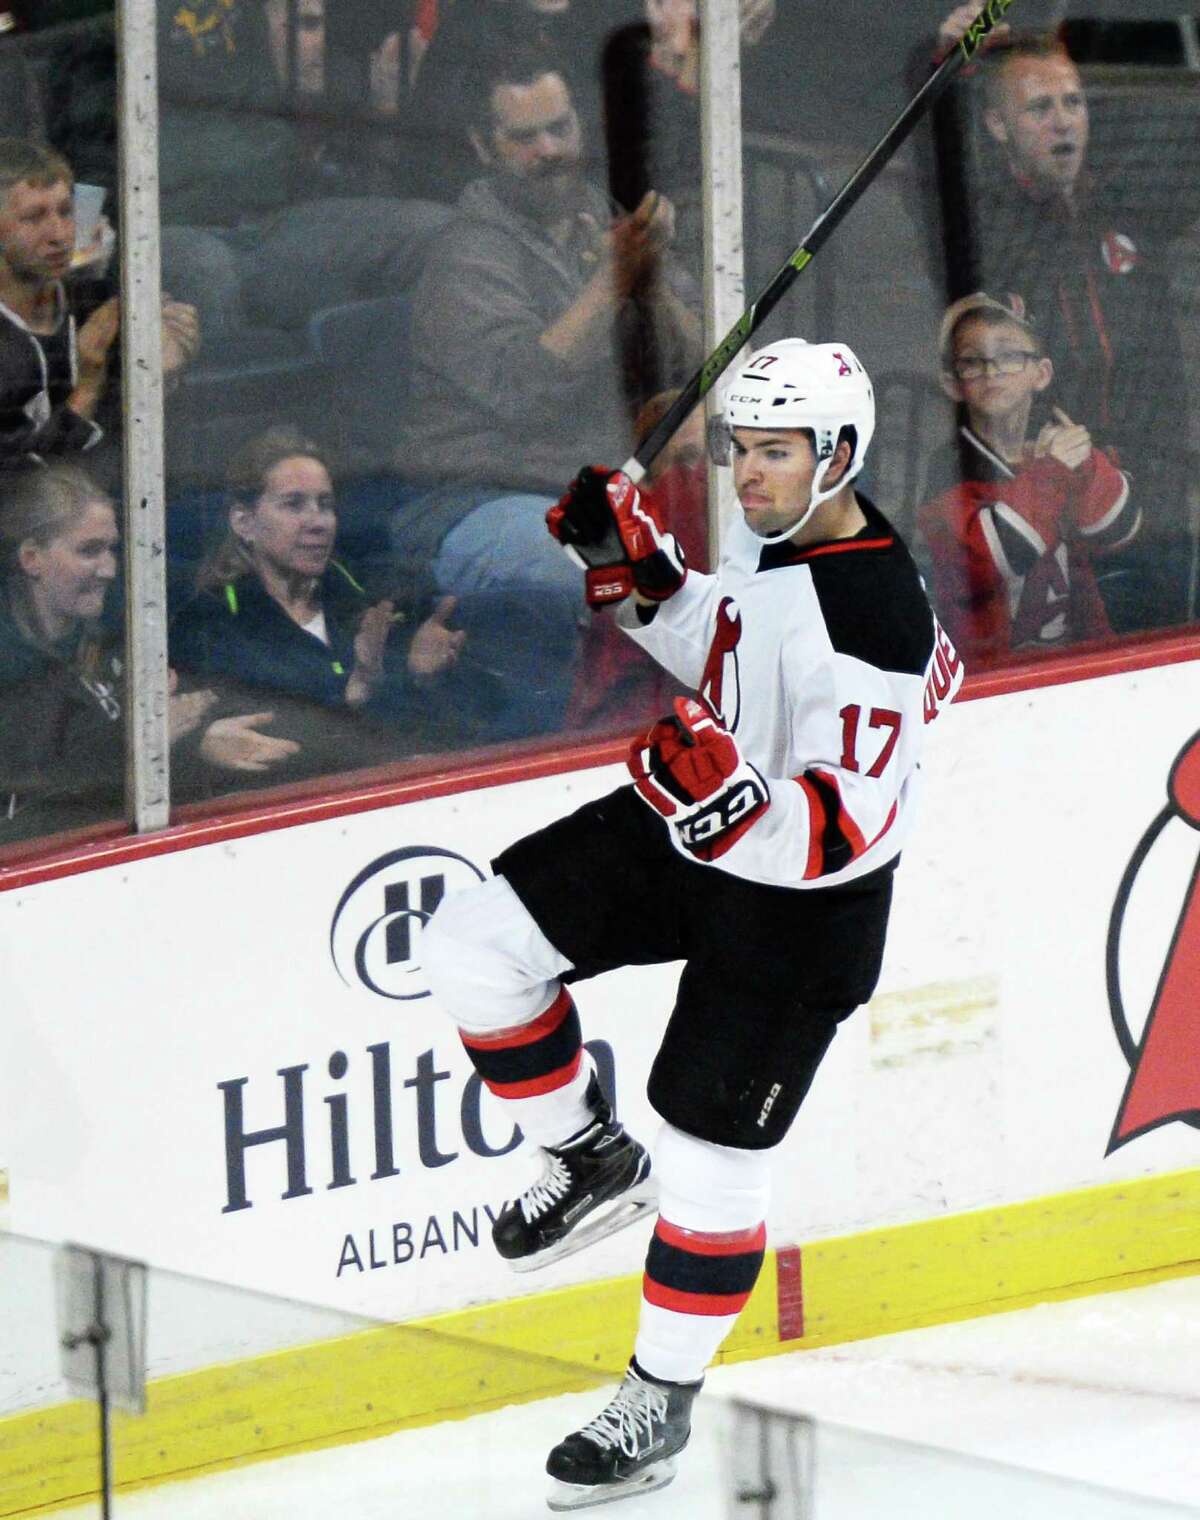 Albany Devils' #17 John Quenneville celebrates his goal during Saturday's home opener against the St. John's IceCaps at the Times Union Center Oct. 15, 2016 in Albany, NY. (John Carl D'Annibale / Times Union) ORG XMIT: MER2016101520313055 ORG XMIT: MER2016121514455173